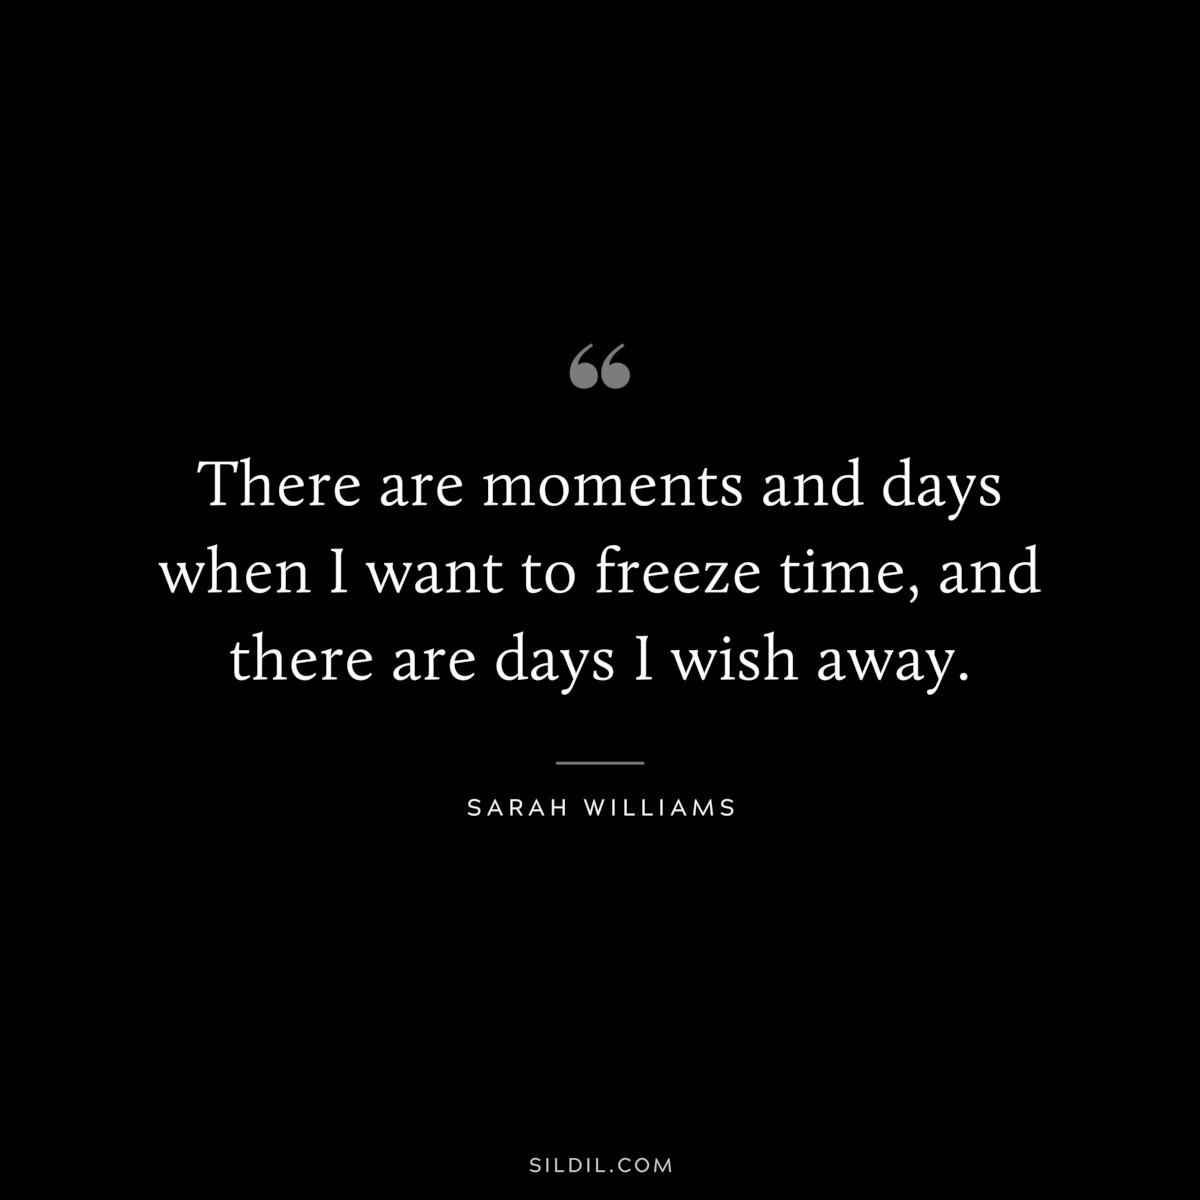 There are moments and days when I want to freeze time, and there are days I wish away. ― Sarah Williams